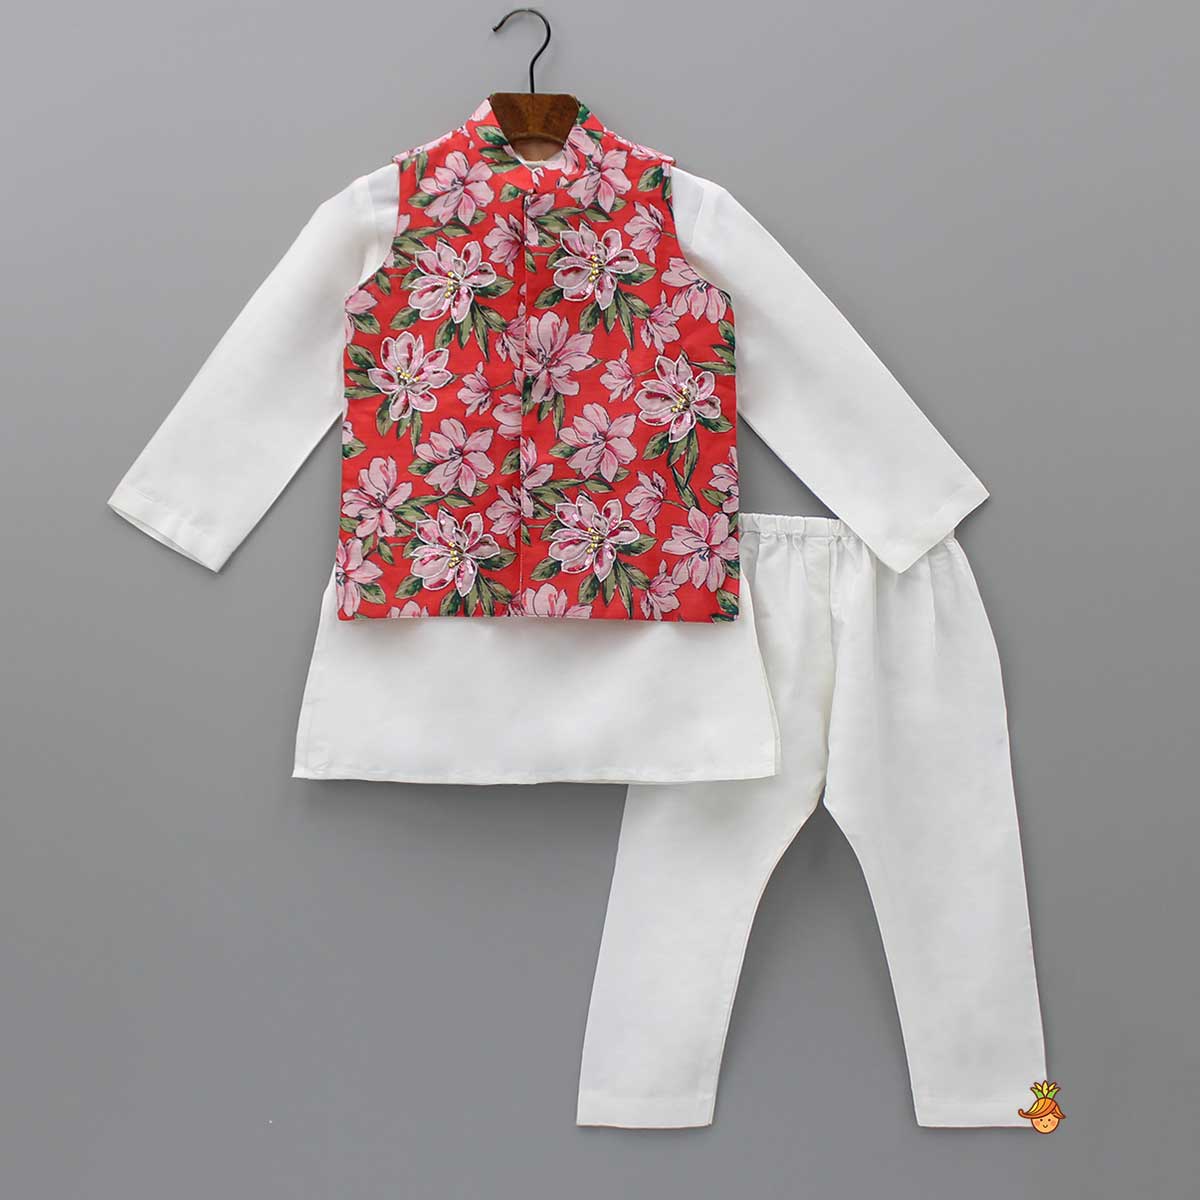 Floral Printed Jacket With Flower Embroidery And Off White Pyjama